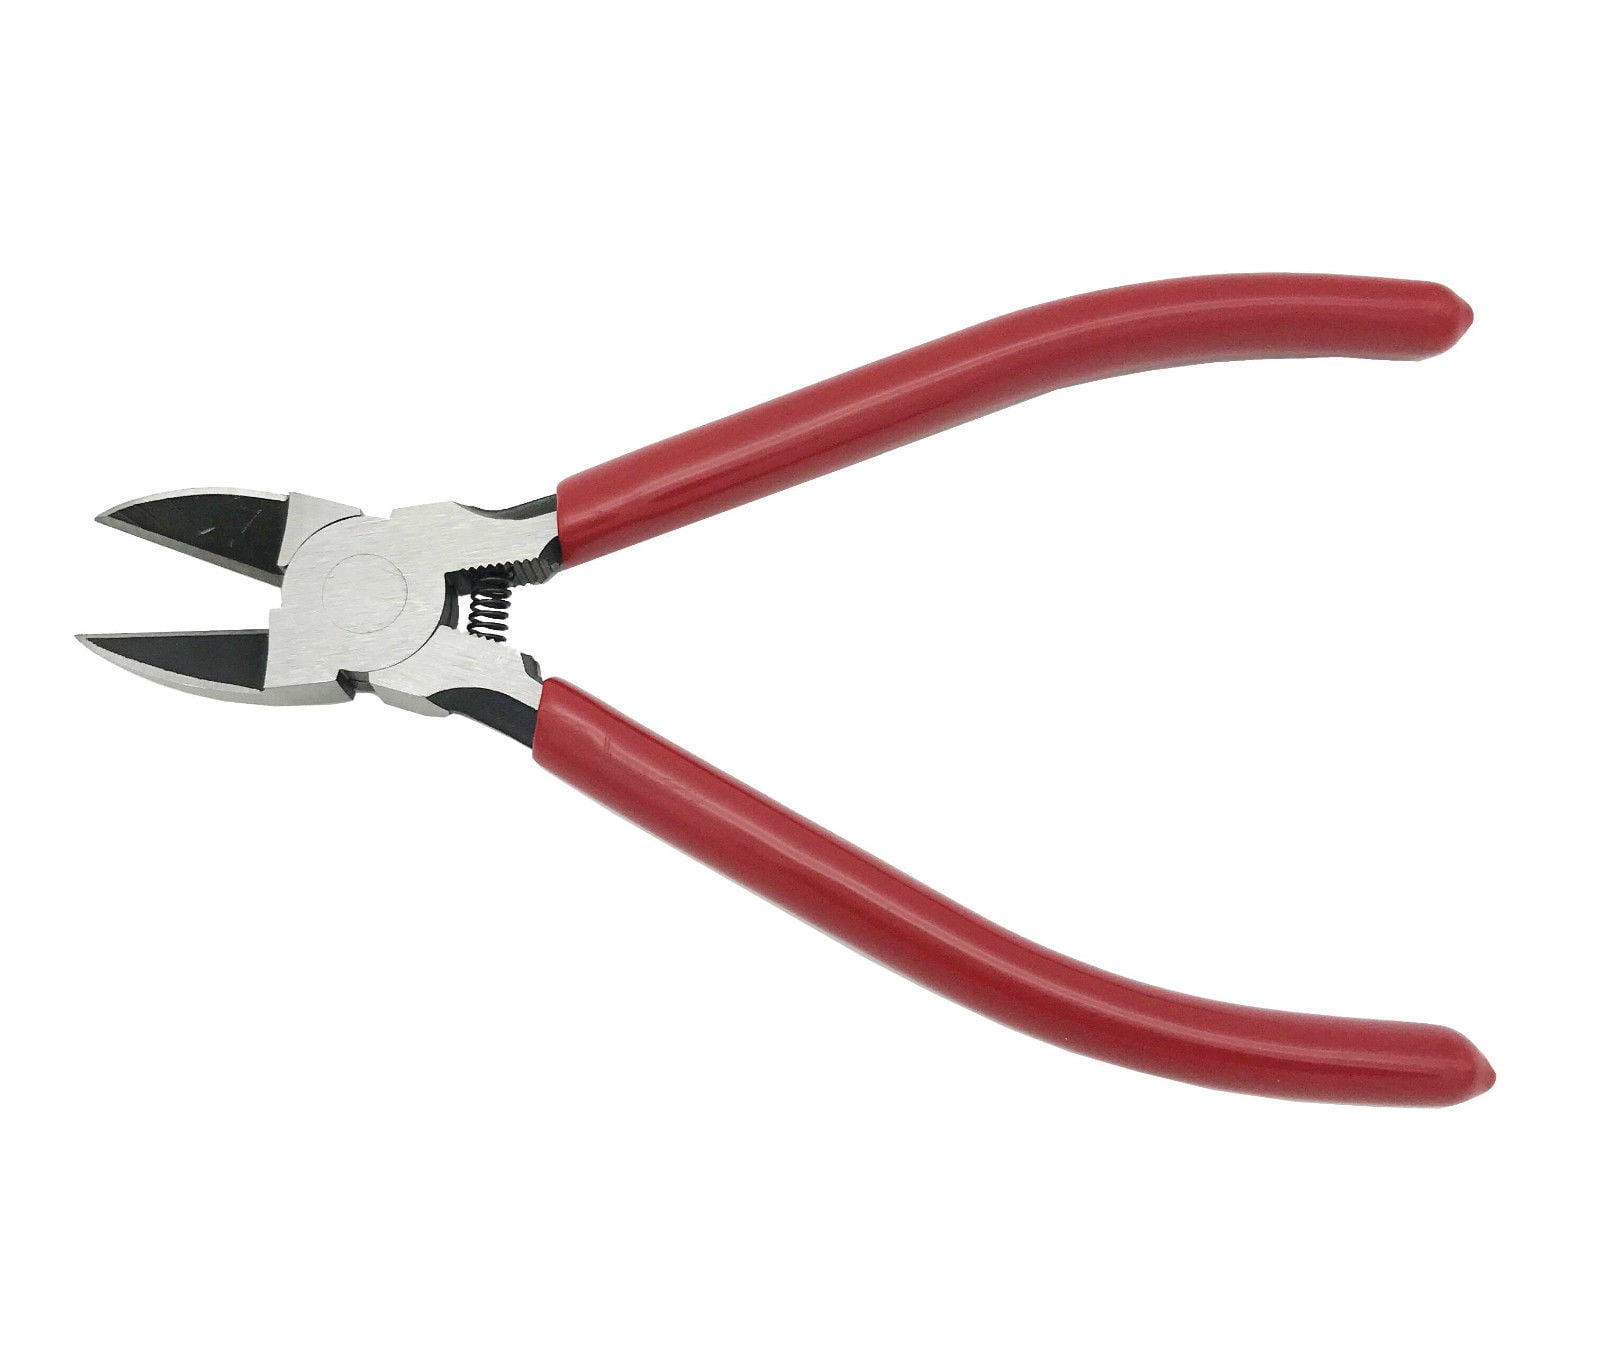 Plastic Handle Diagonal Cutter Plier Jewelry Making 6 Inches Hand Repair Tool